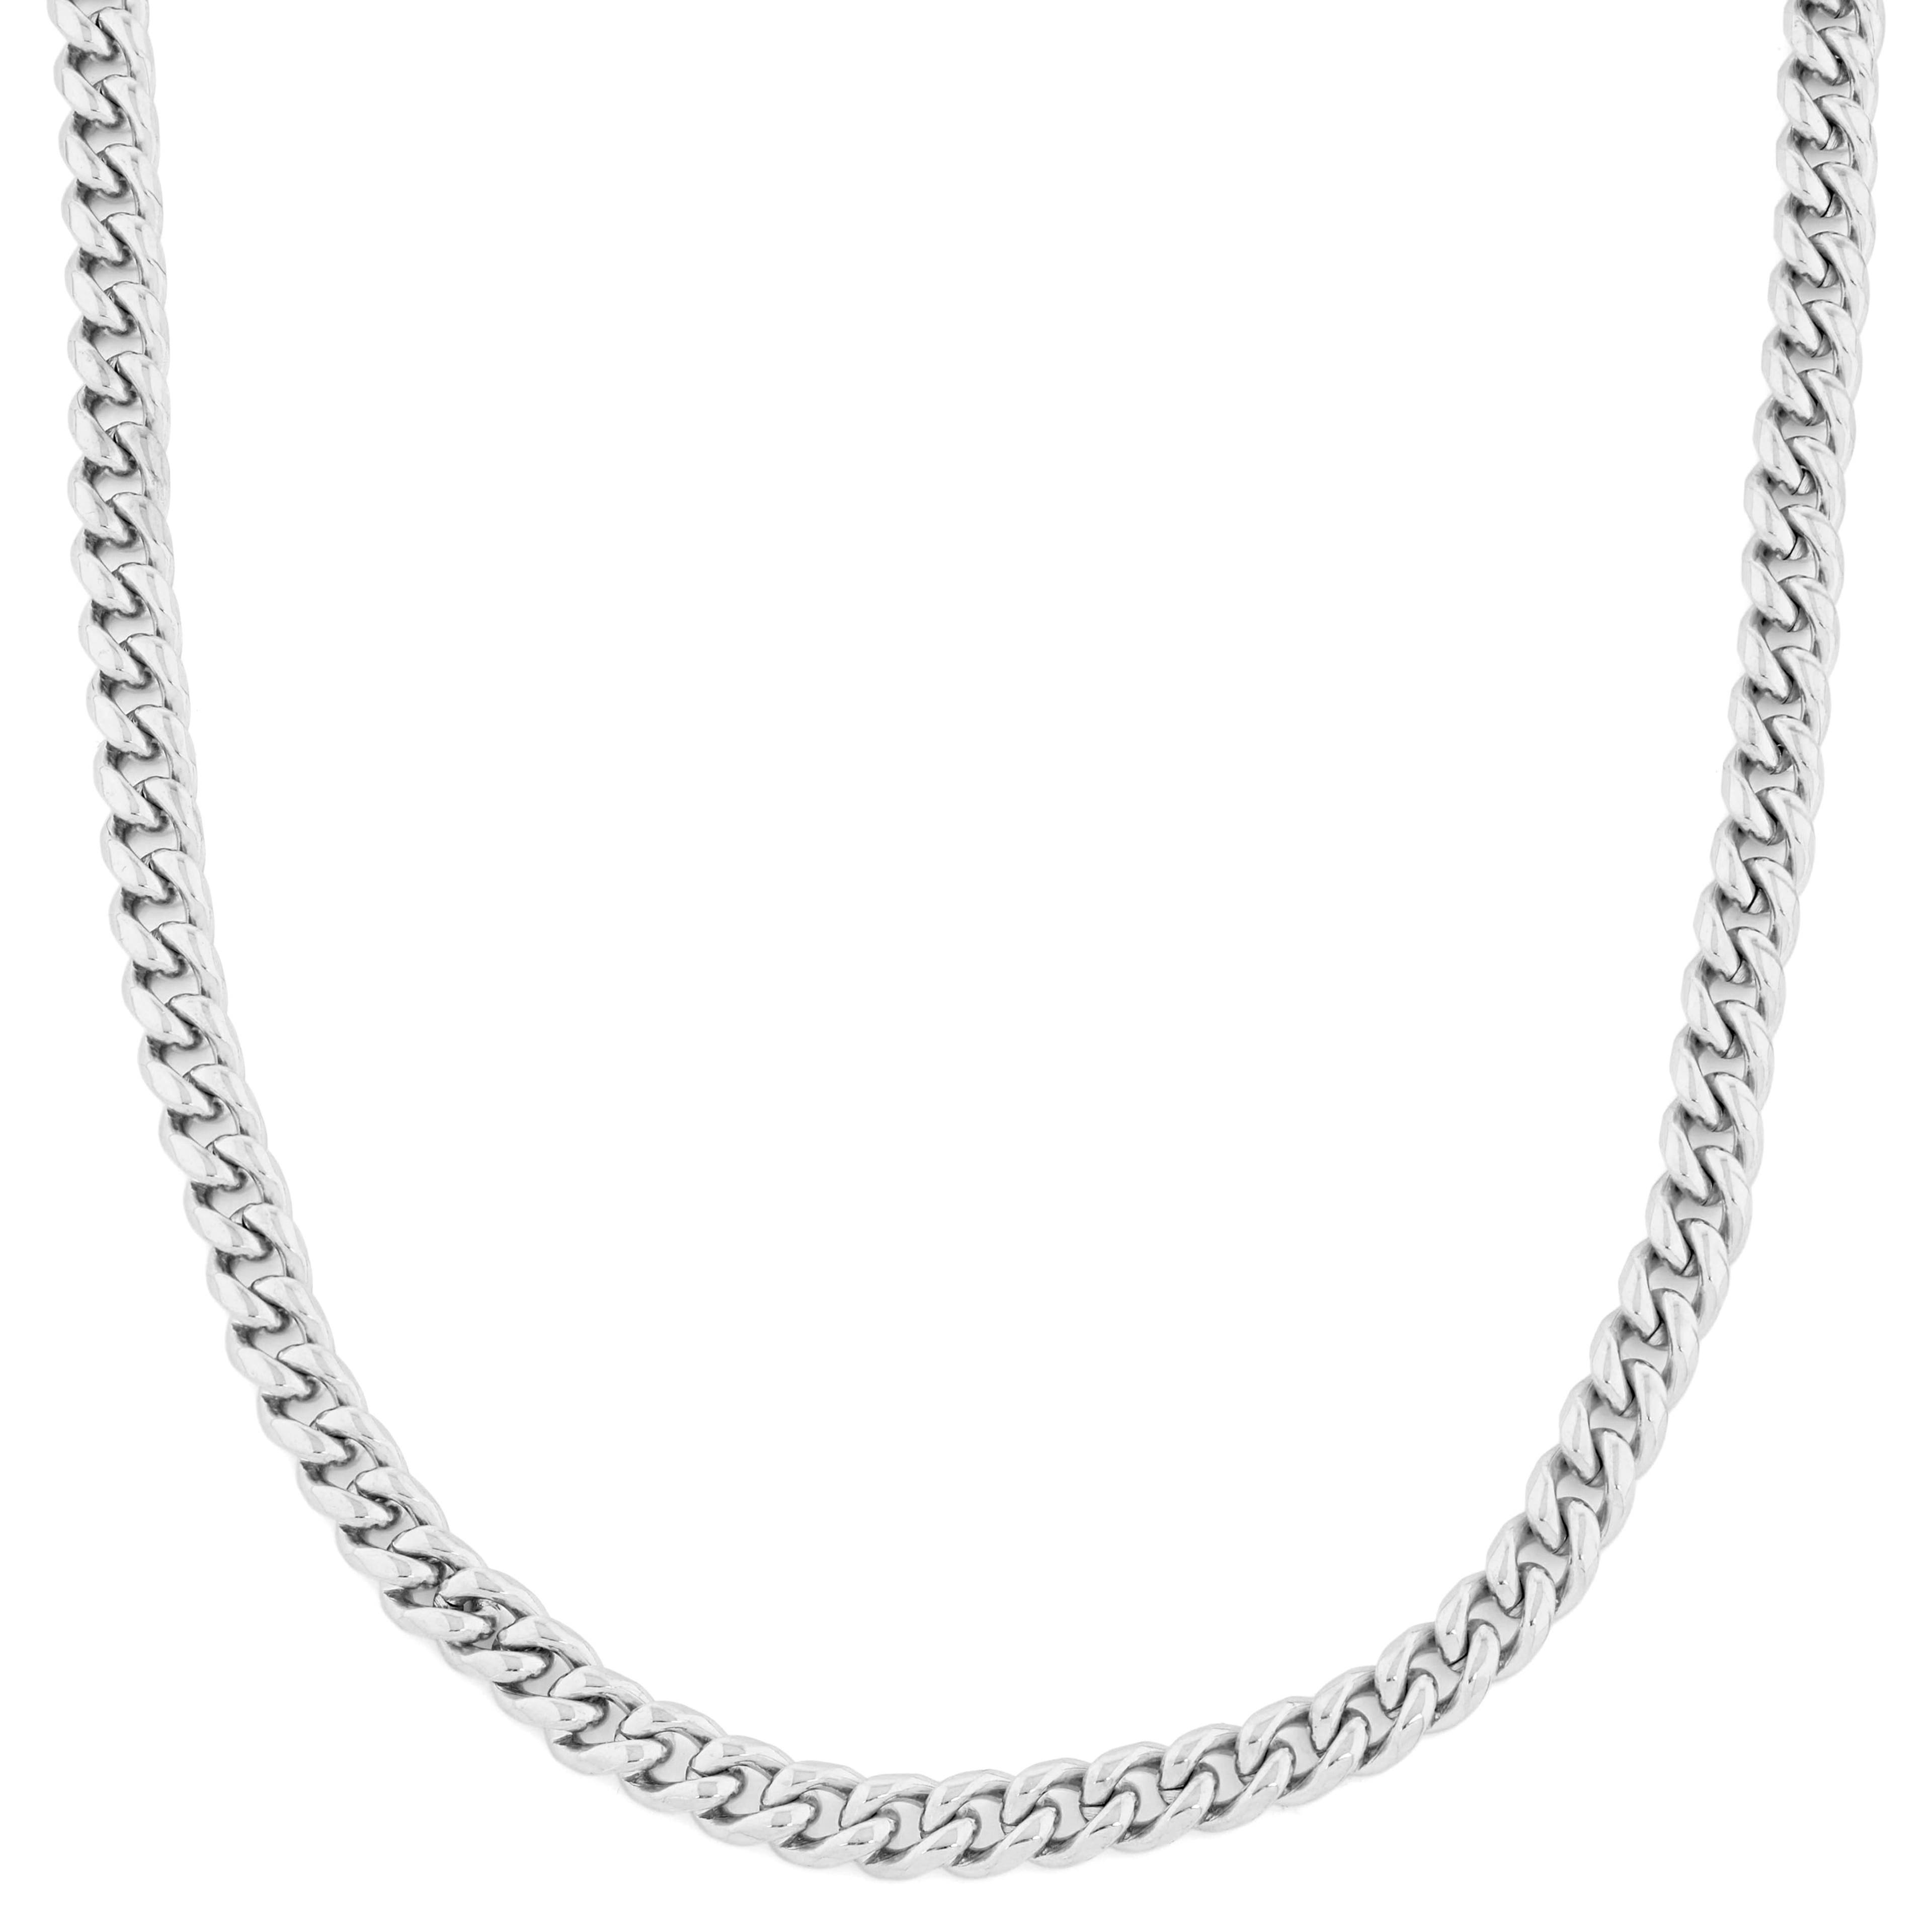 8 mm Silver-Tone Stainless Steel Cuban Chain Necklace, In stock!